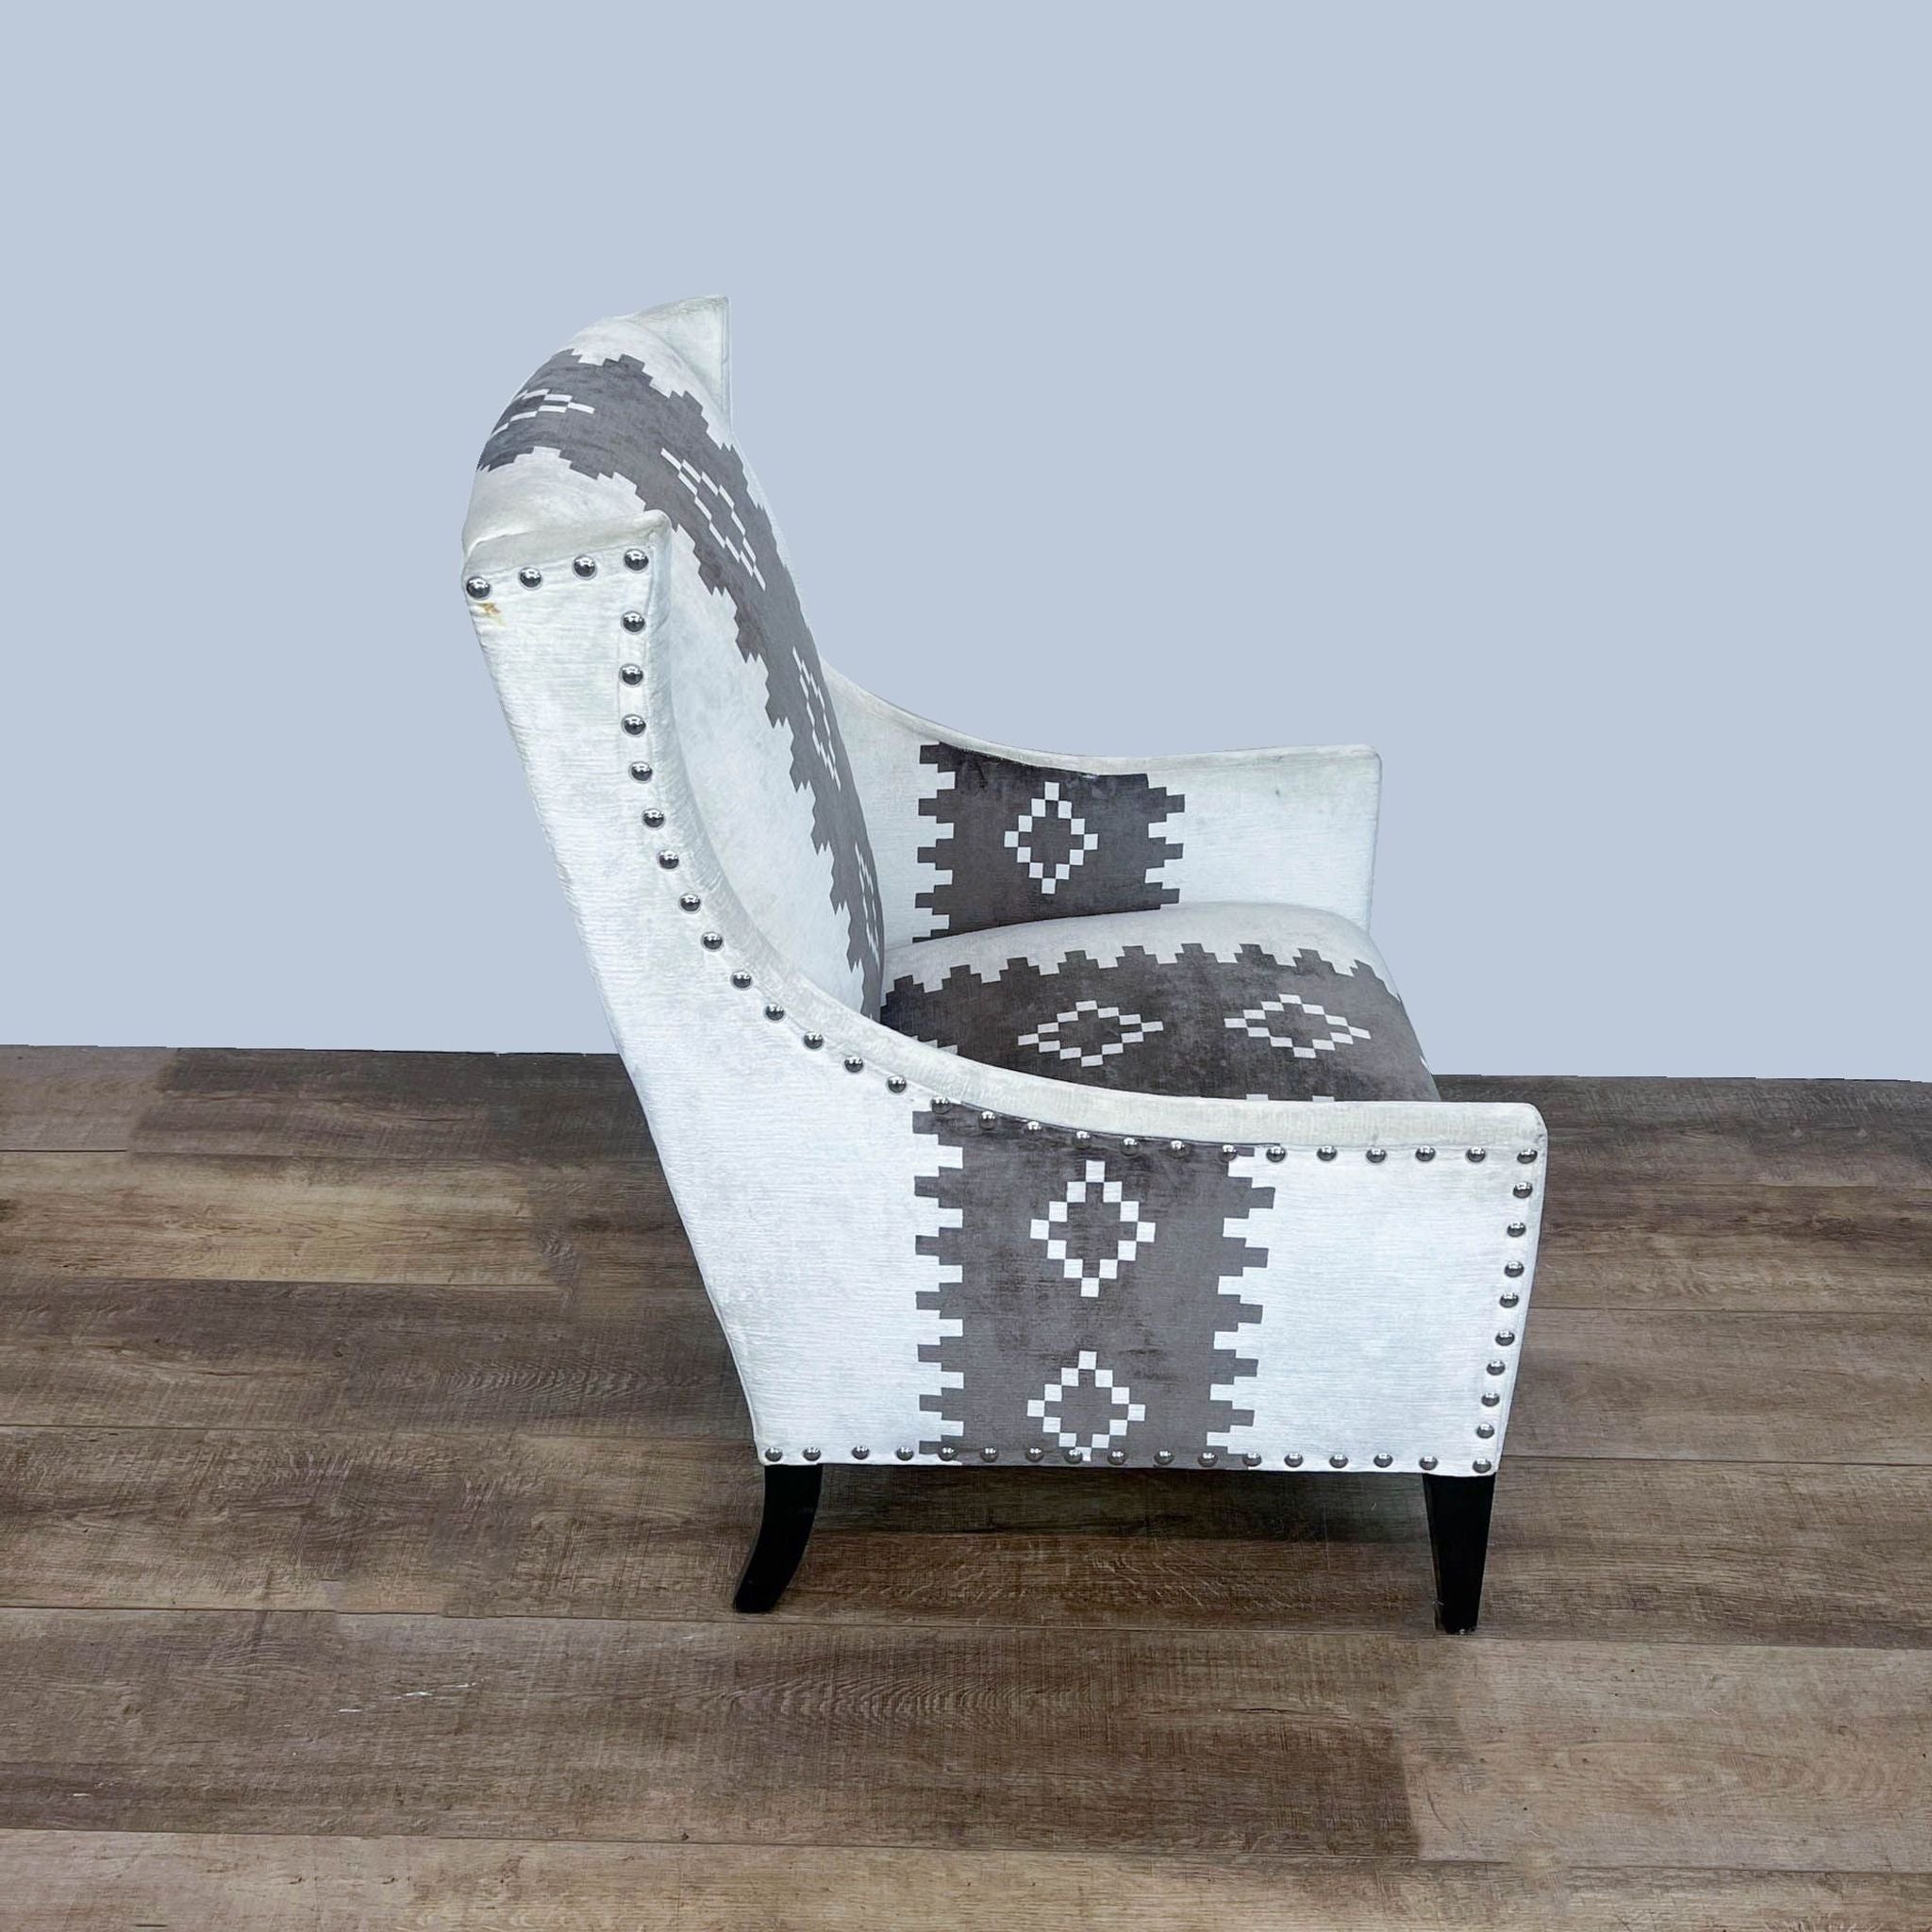 High-backed Andrew Martin Pluto chair with western print fabric and nailhead trim on a wooden floor.